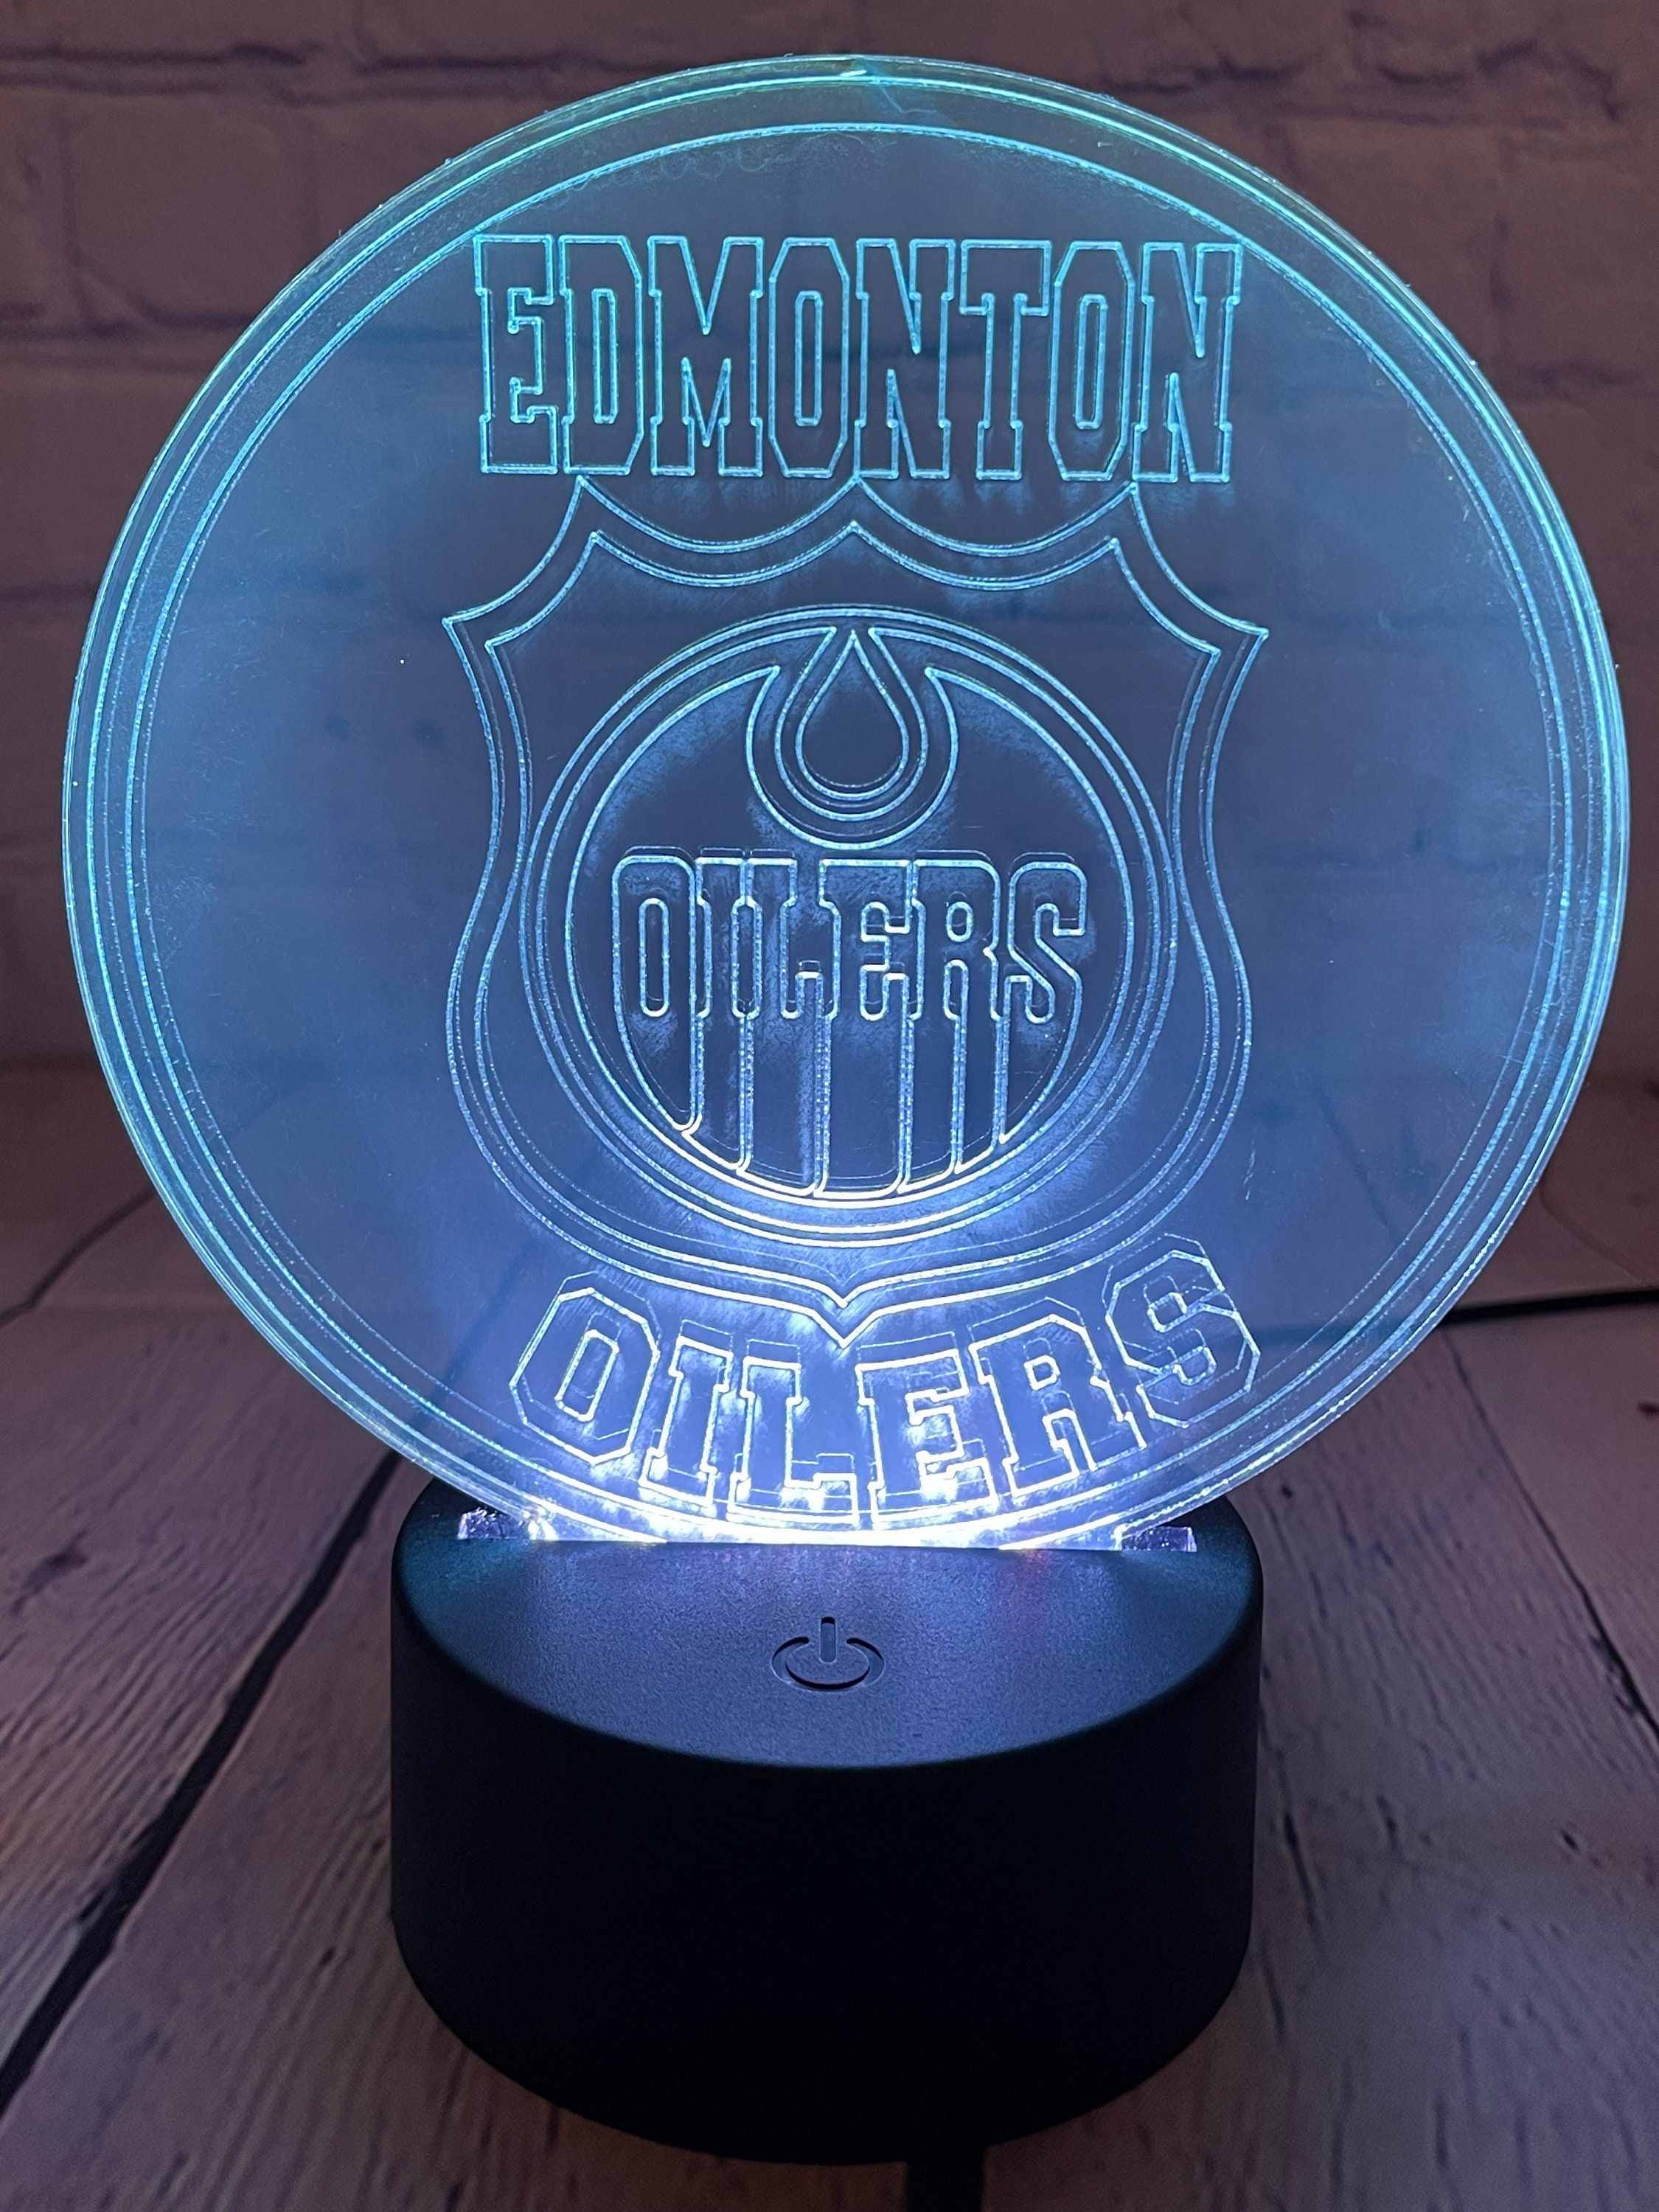 Edmonton Oilers Personalized Name 3D Tshirt Ideal Gift For Men And Women  Fans - Freedomdesign